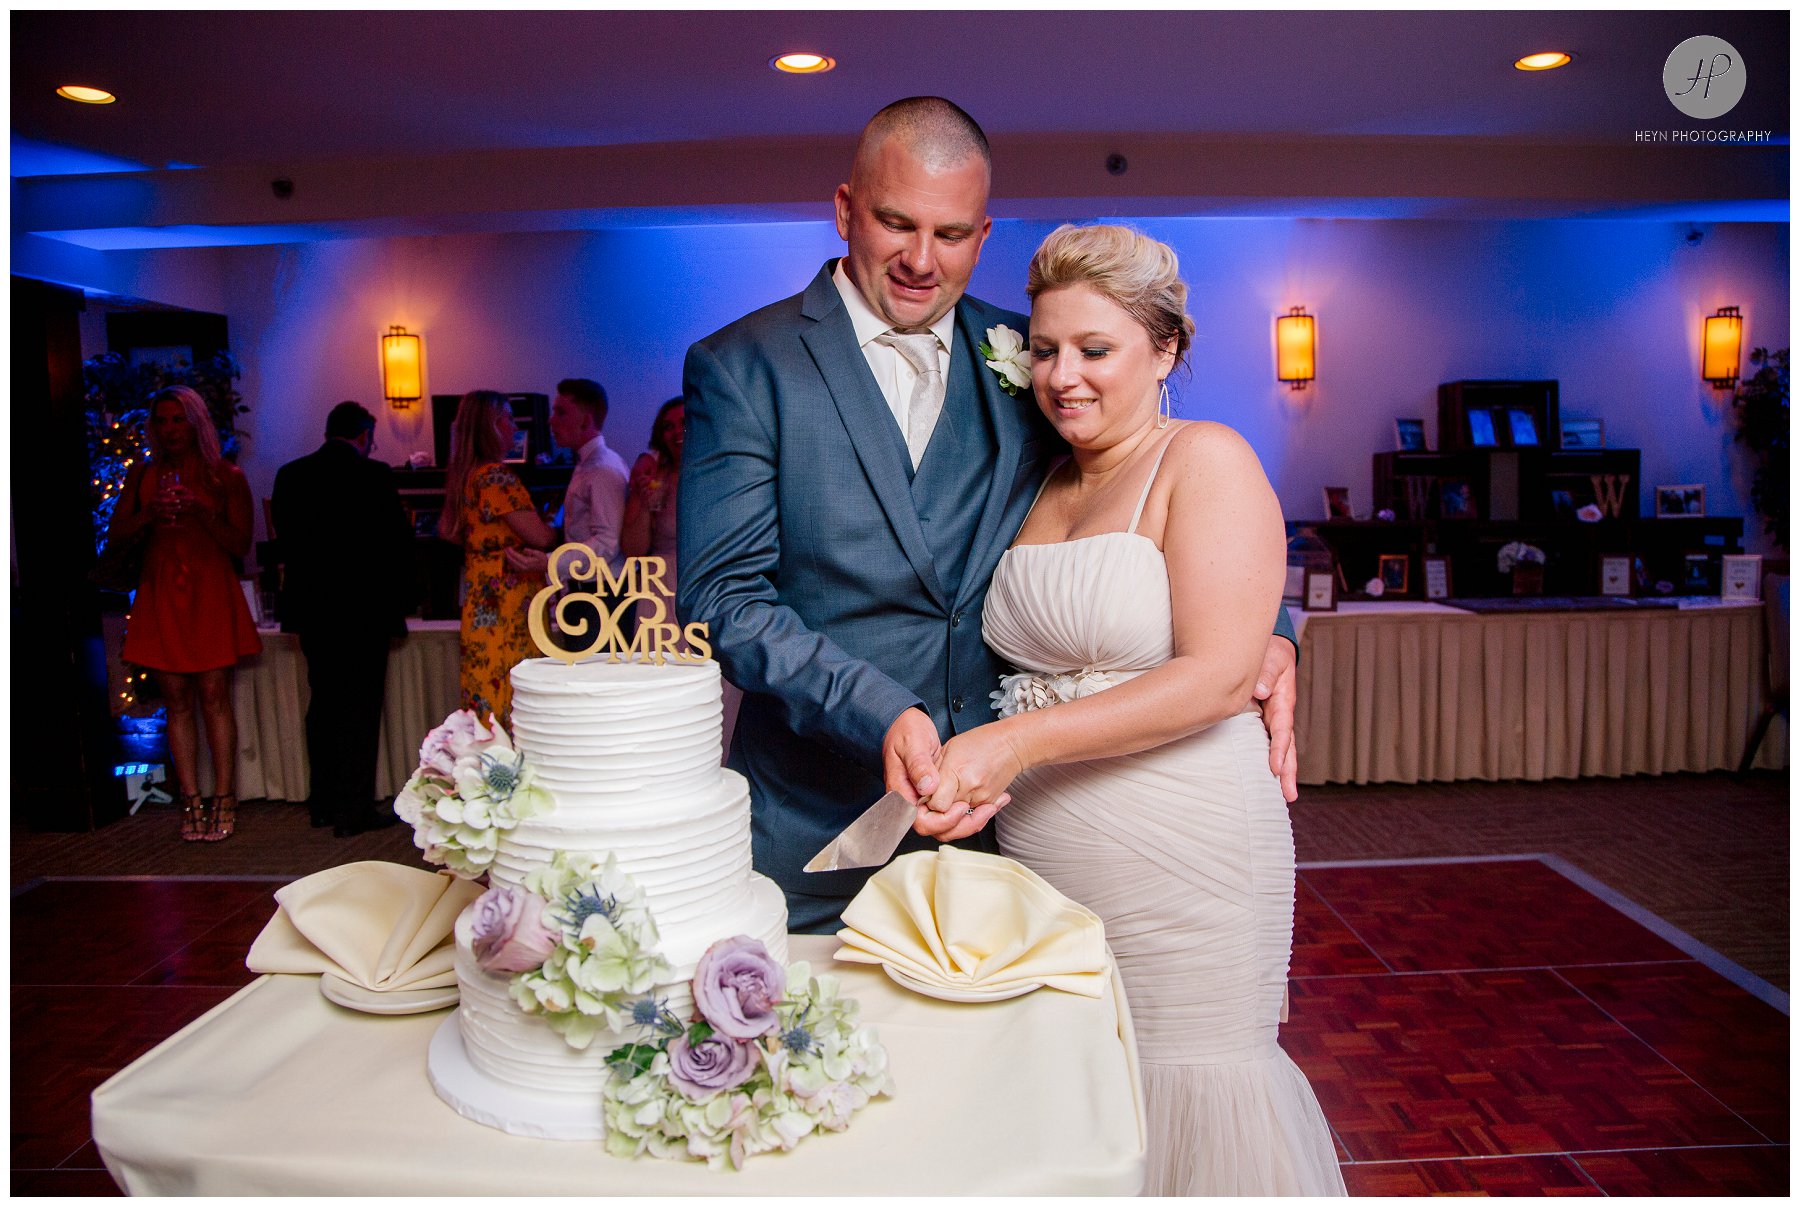 bride and groom cutting cake at salt creek grille wedding in new jersey 